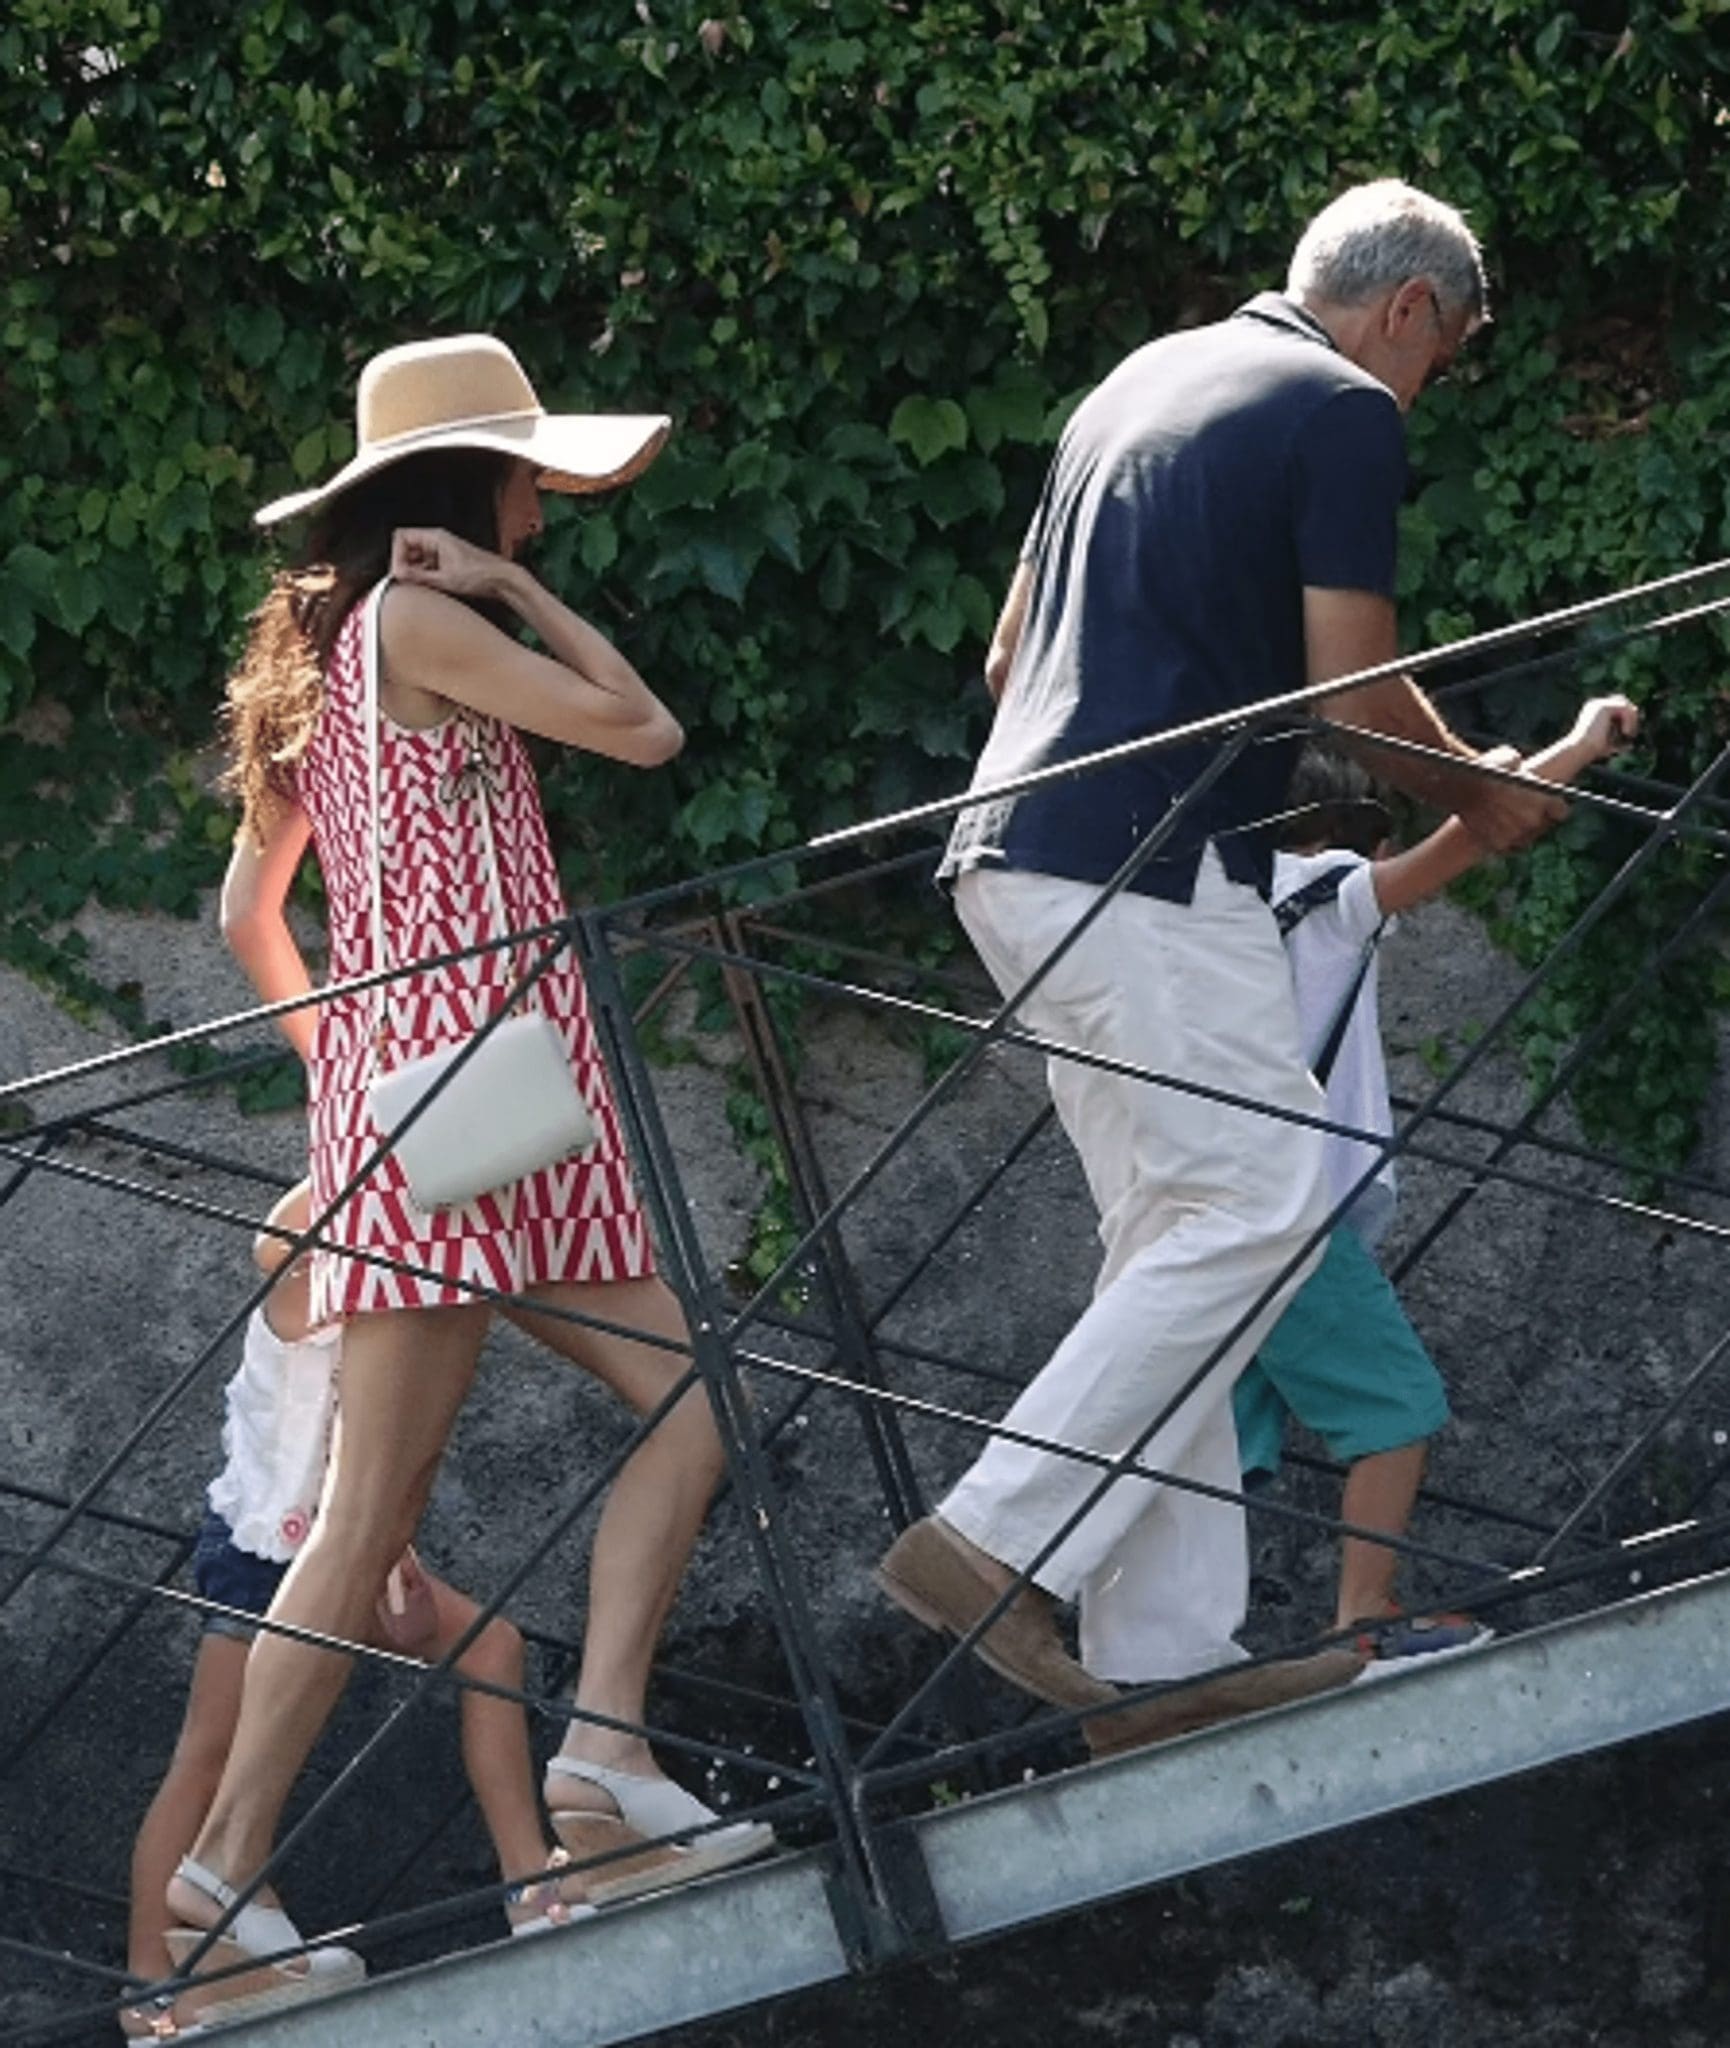 George Clooney And Amal Clooney Went On A Boat Tour With Their Five-Year-Old Twins In A Flippant Mini